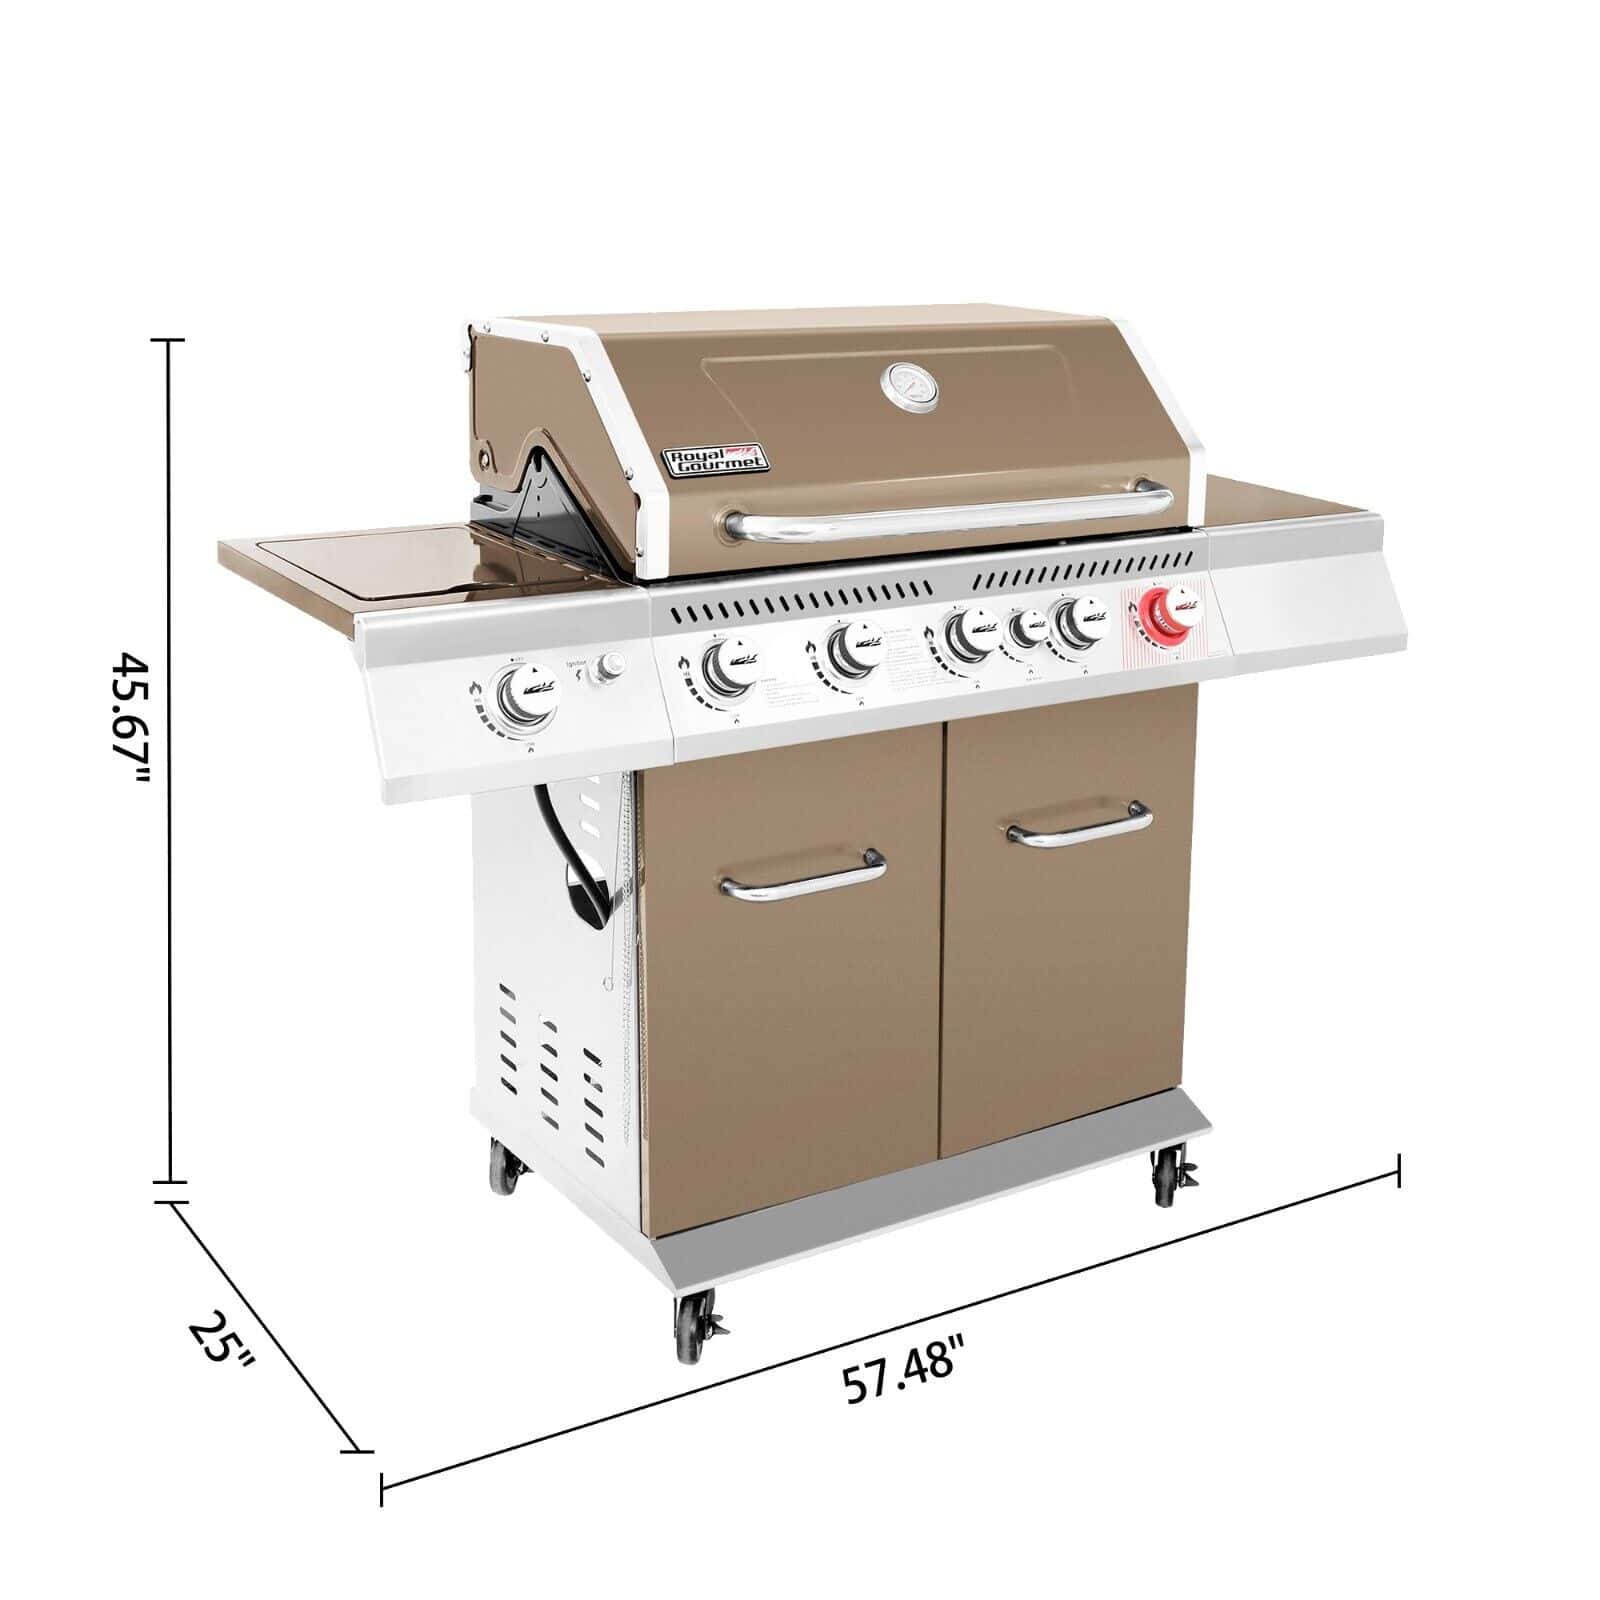 A bbq grill with two burners and a side burner.